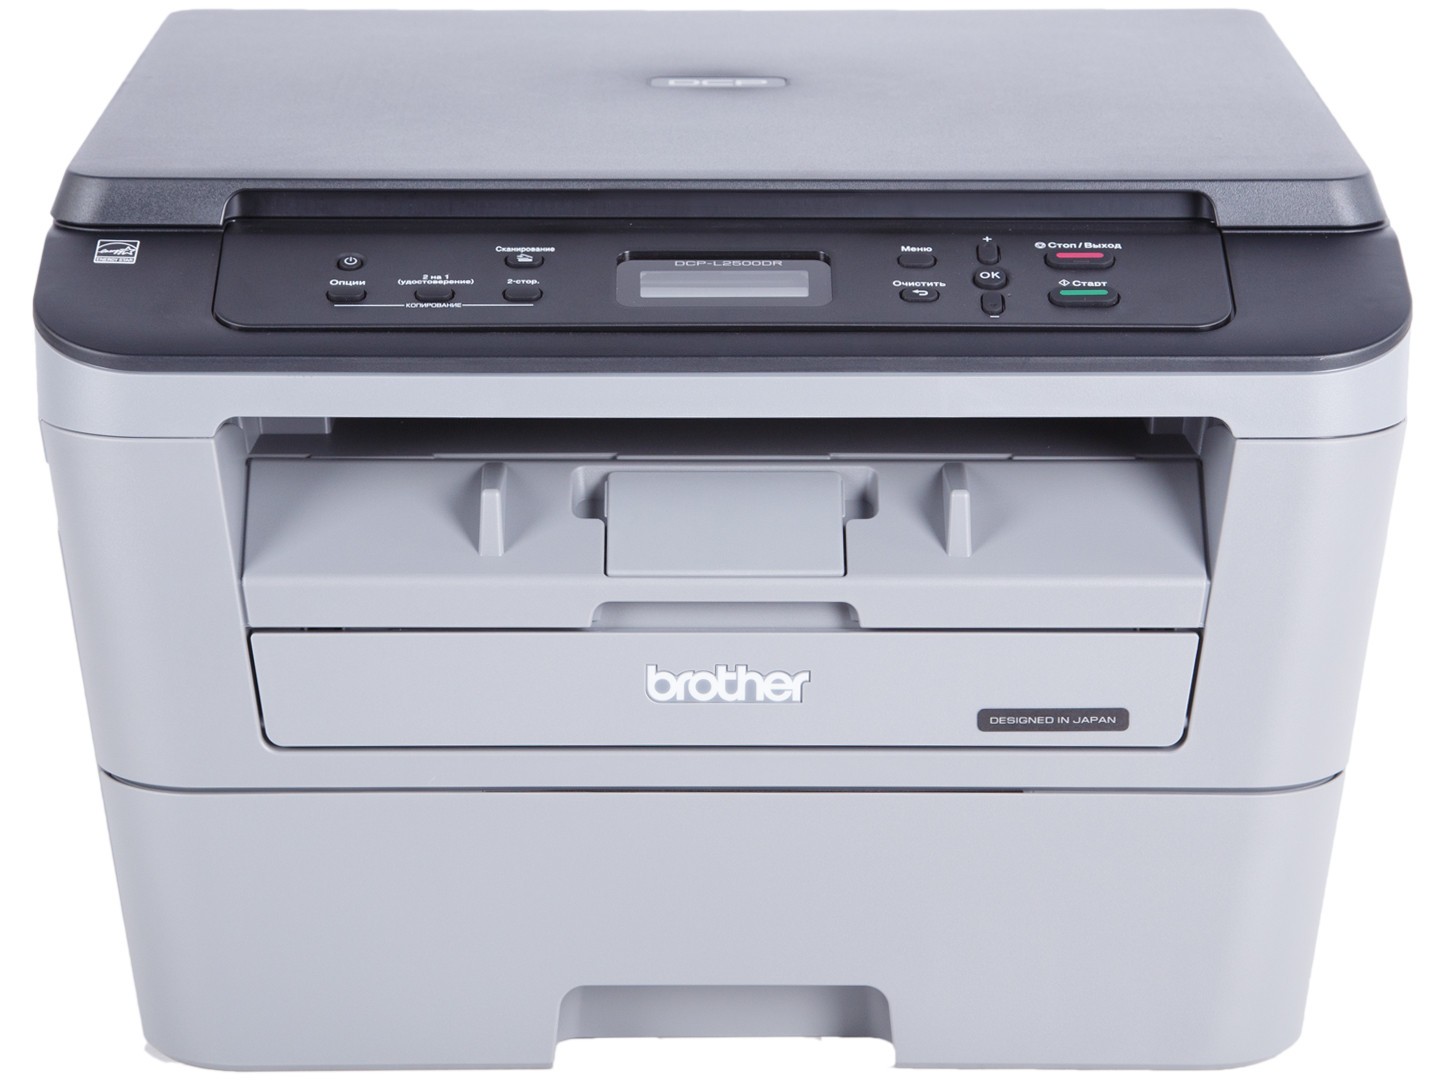 Brother l2500d. МФУ brother DCP-l2500dr. МФУ лазерный brother DCP-l2500dr, a4, лазерный. Принтер brother DCP l2500dr. Лазерное МФУ DCP-l6600dw.